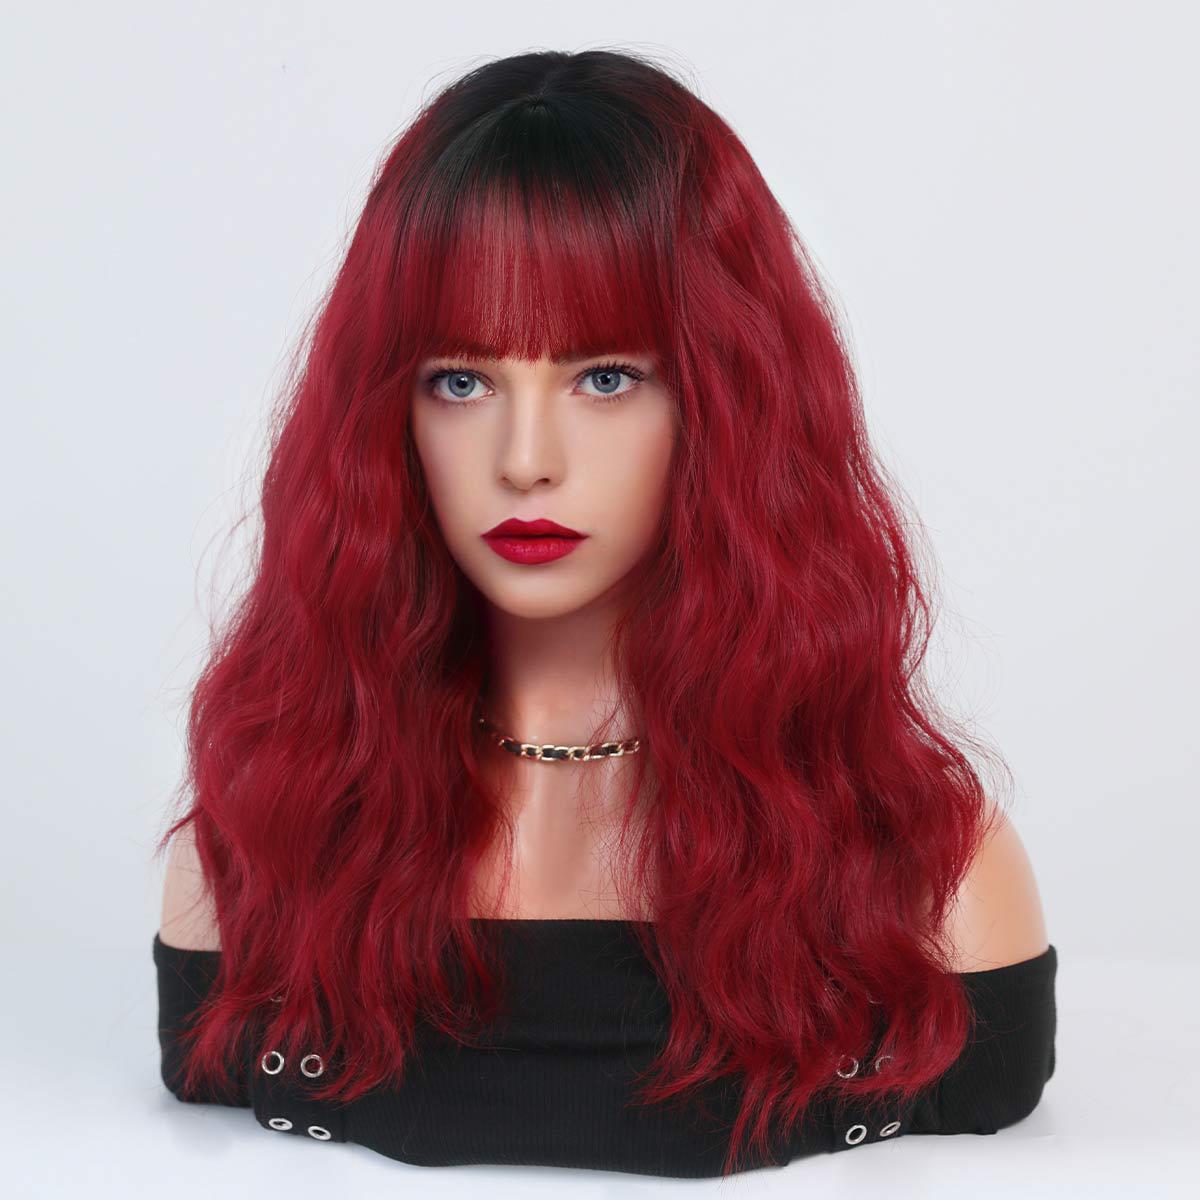 A fashionable female haze blue wig with wavy medium-length curly synthetic hair, designed for easy styling and a ready-to-wear look